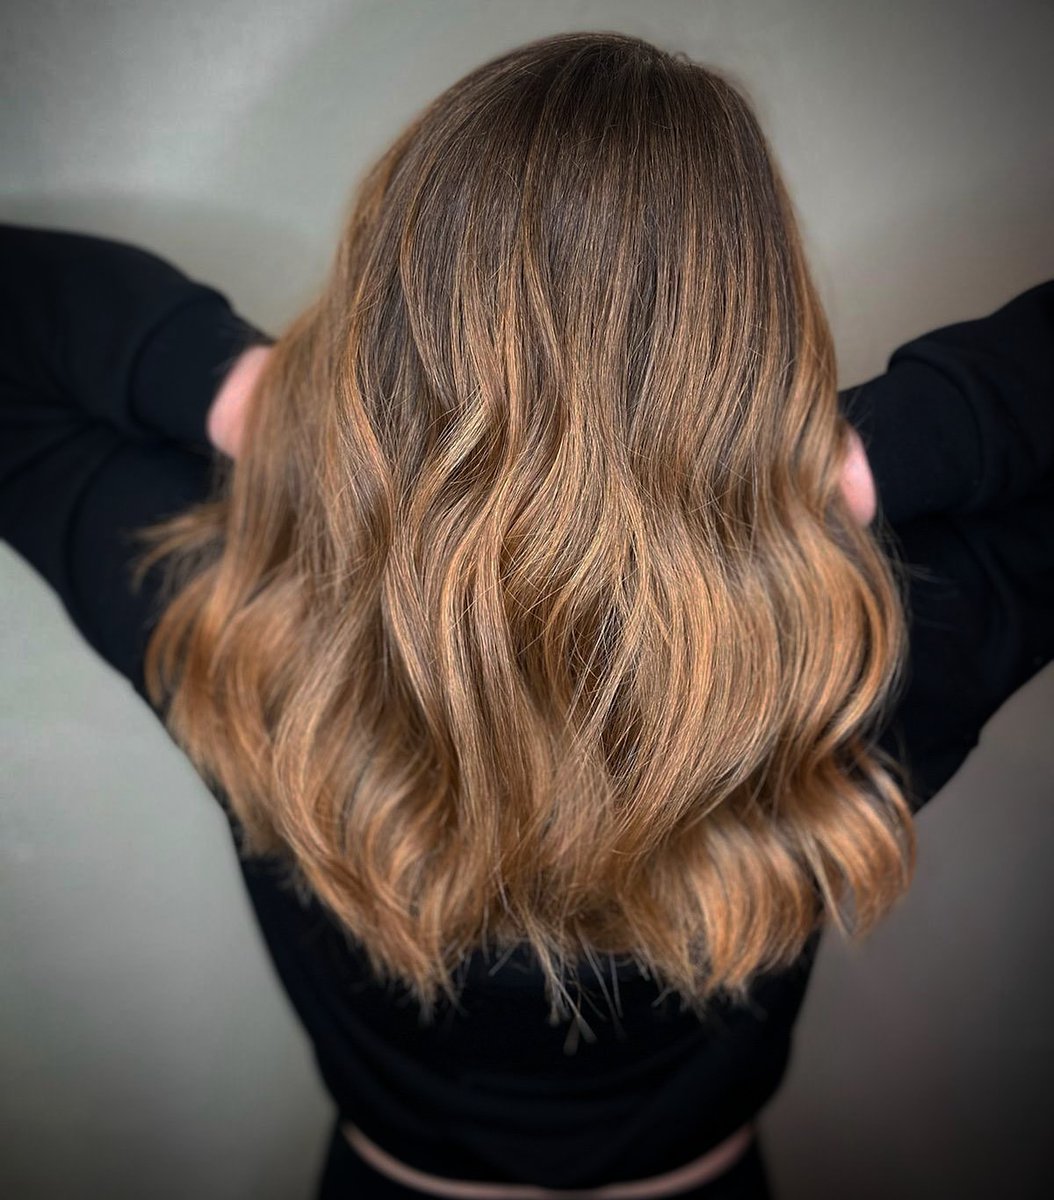 On a  R O L L  today 😍

#aveda #avedastylist #avedacolor #avedablonde #balayage #planethairusa